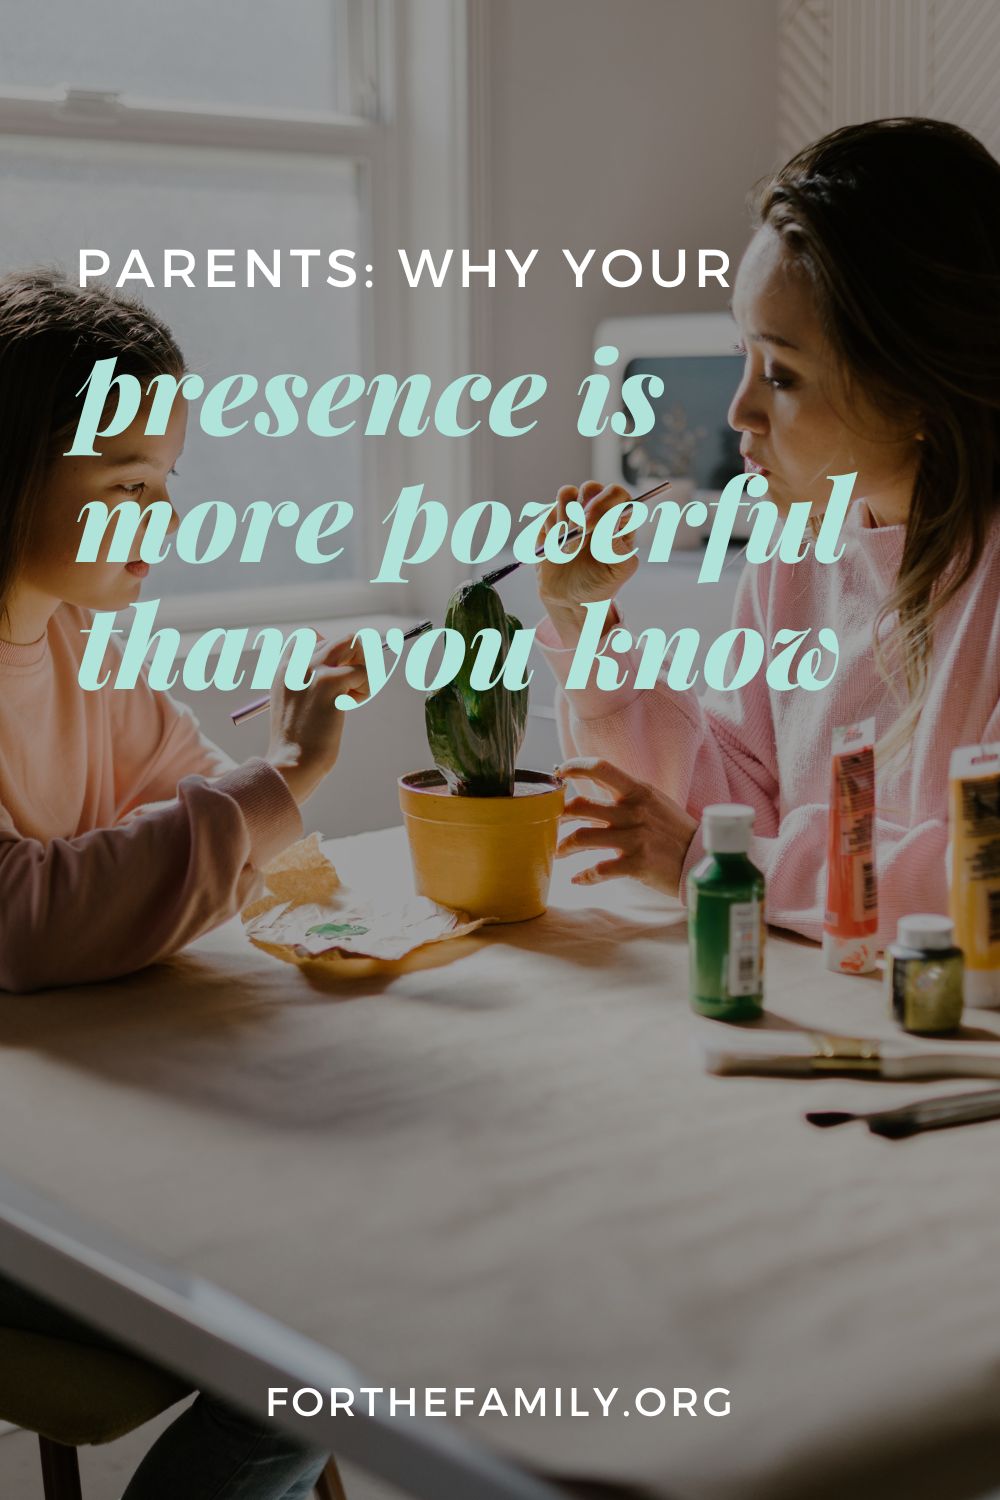 Parents: Why Your Presence Is More Powerful than You Know